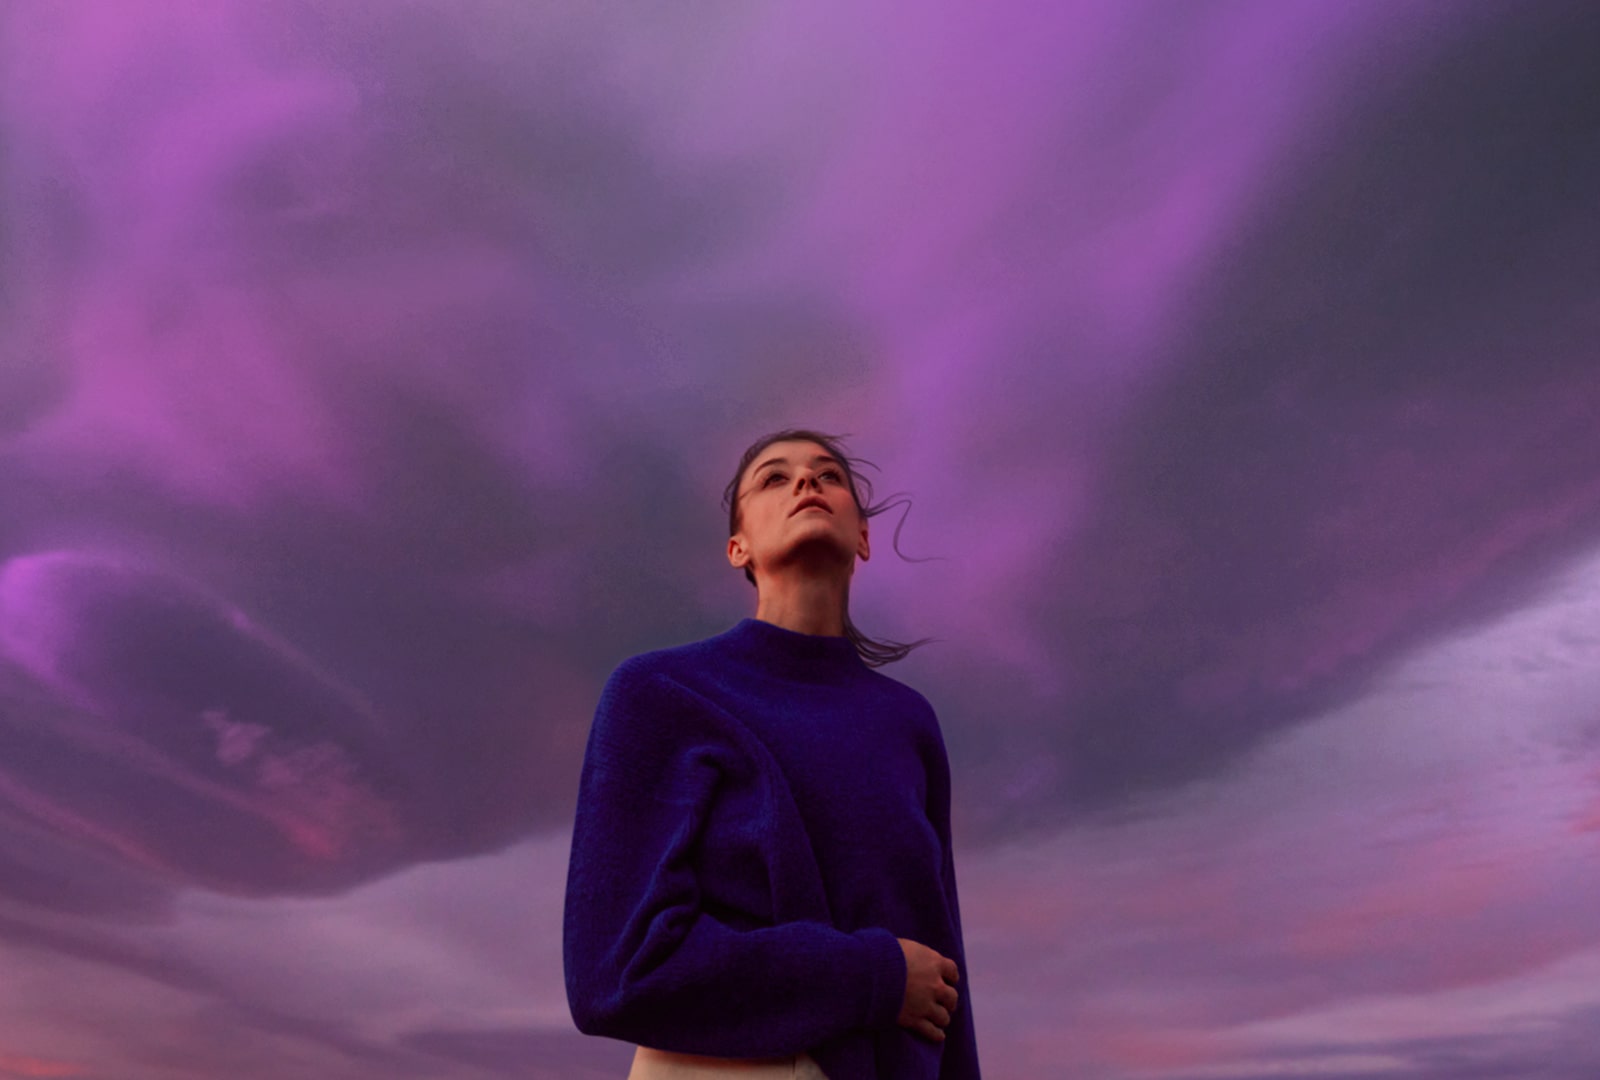 A woman looks at a purple sky. Her hair flutters slightly.